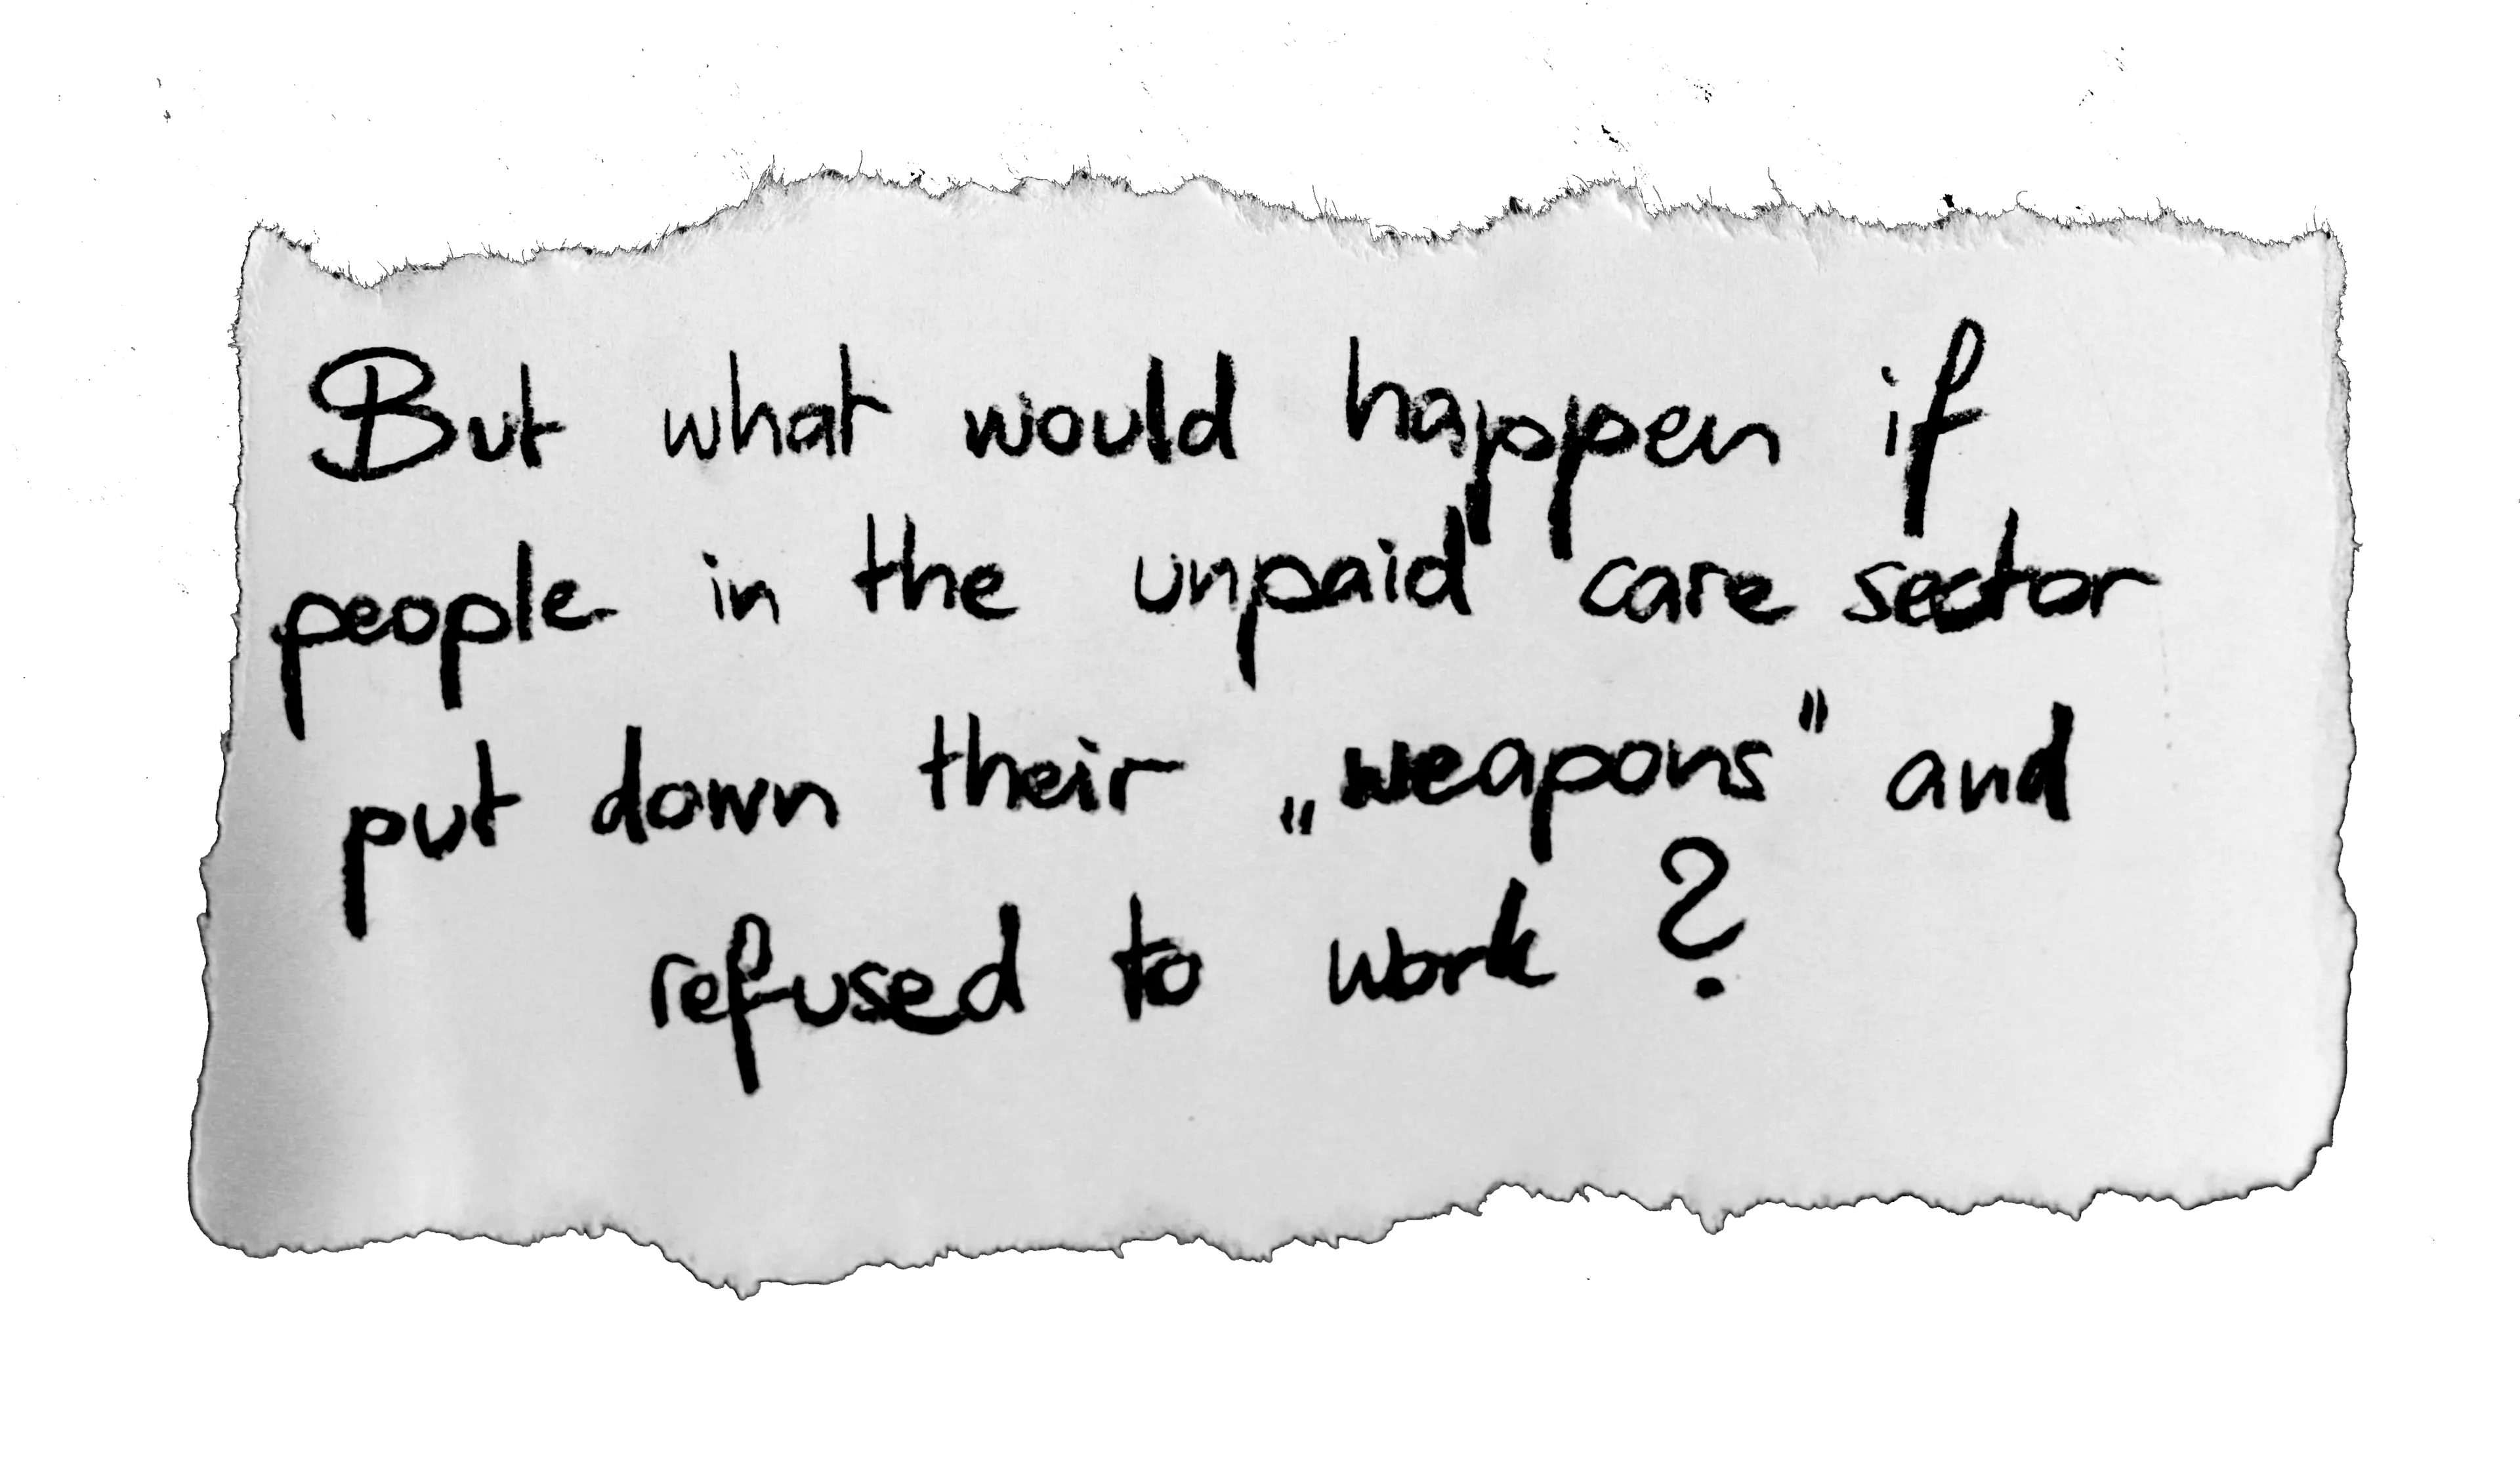 But what would happen if people in the unpaid care sector put down their weapons and refused to work?